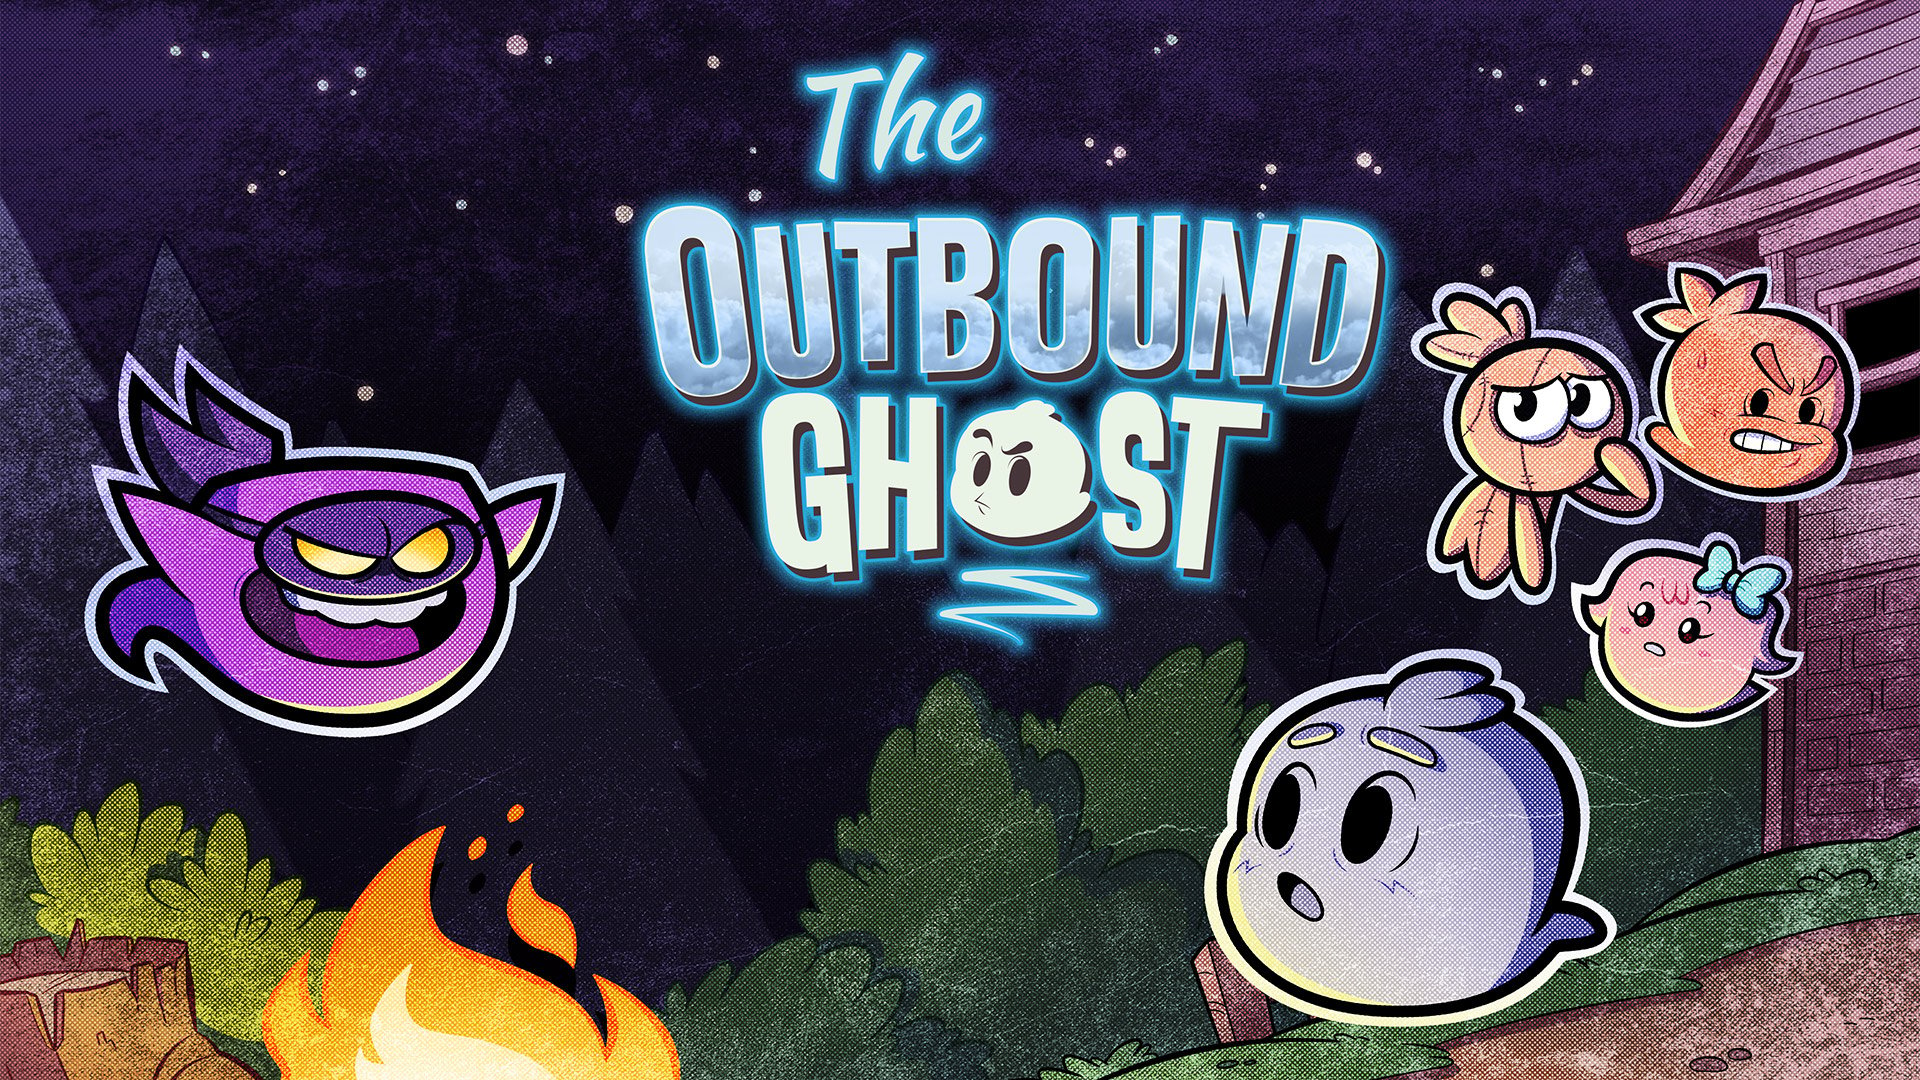 the-outbound-ghost-video-1a6xc.jpg